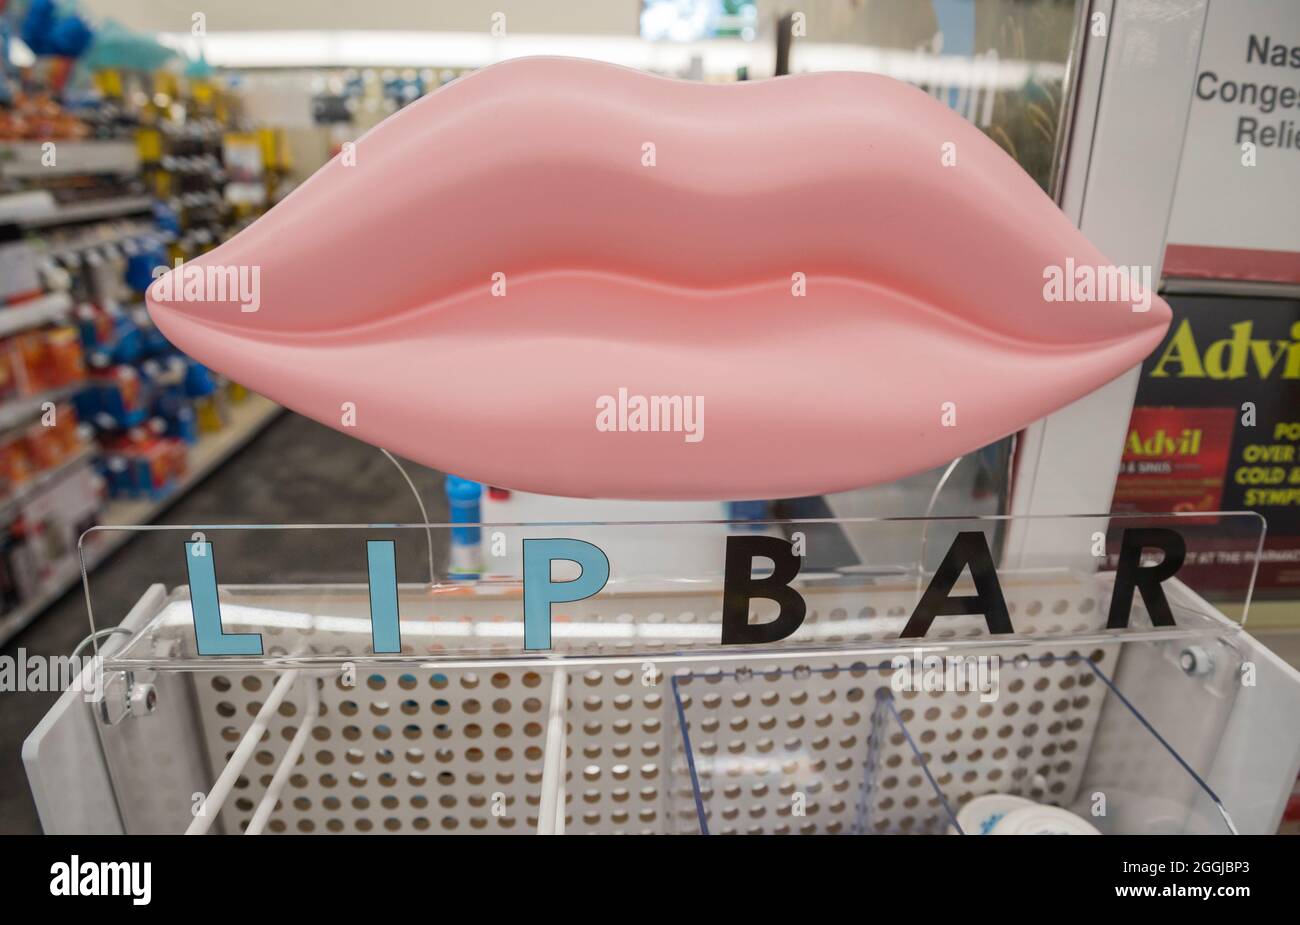 Giant lips guarding the 'Lip Bar' in a local pharmacy in North Central Florida. Stock Photo